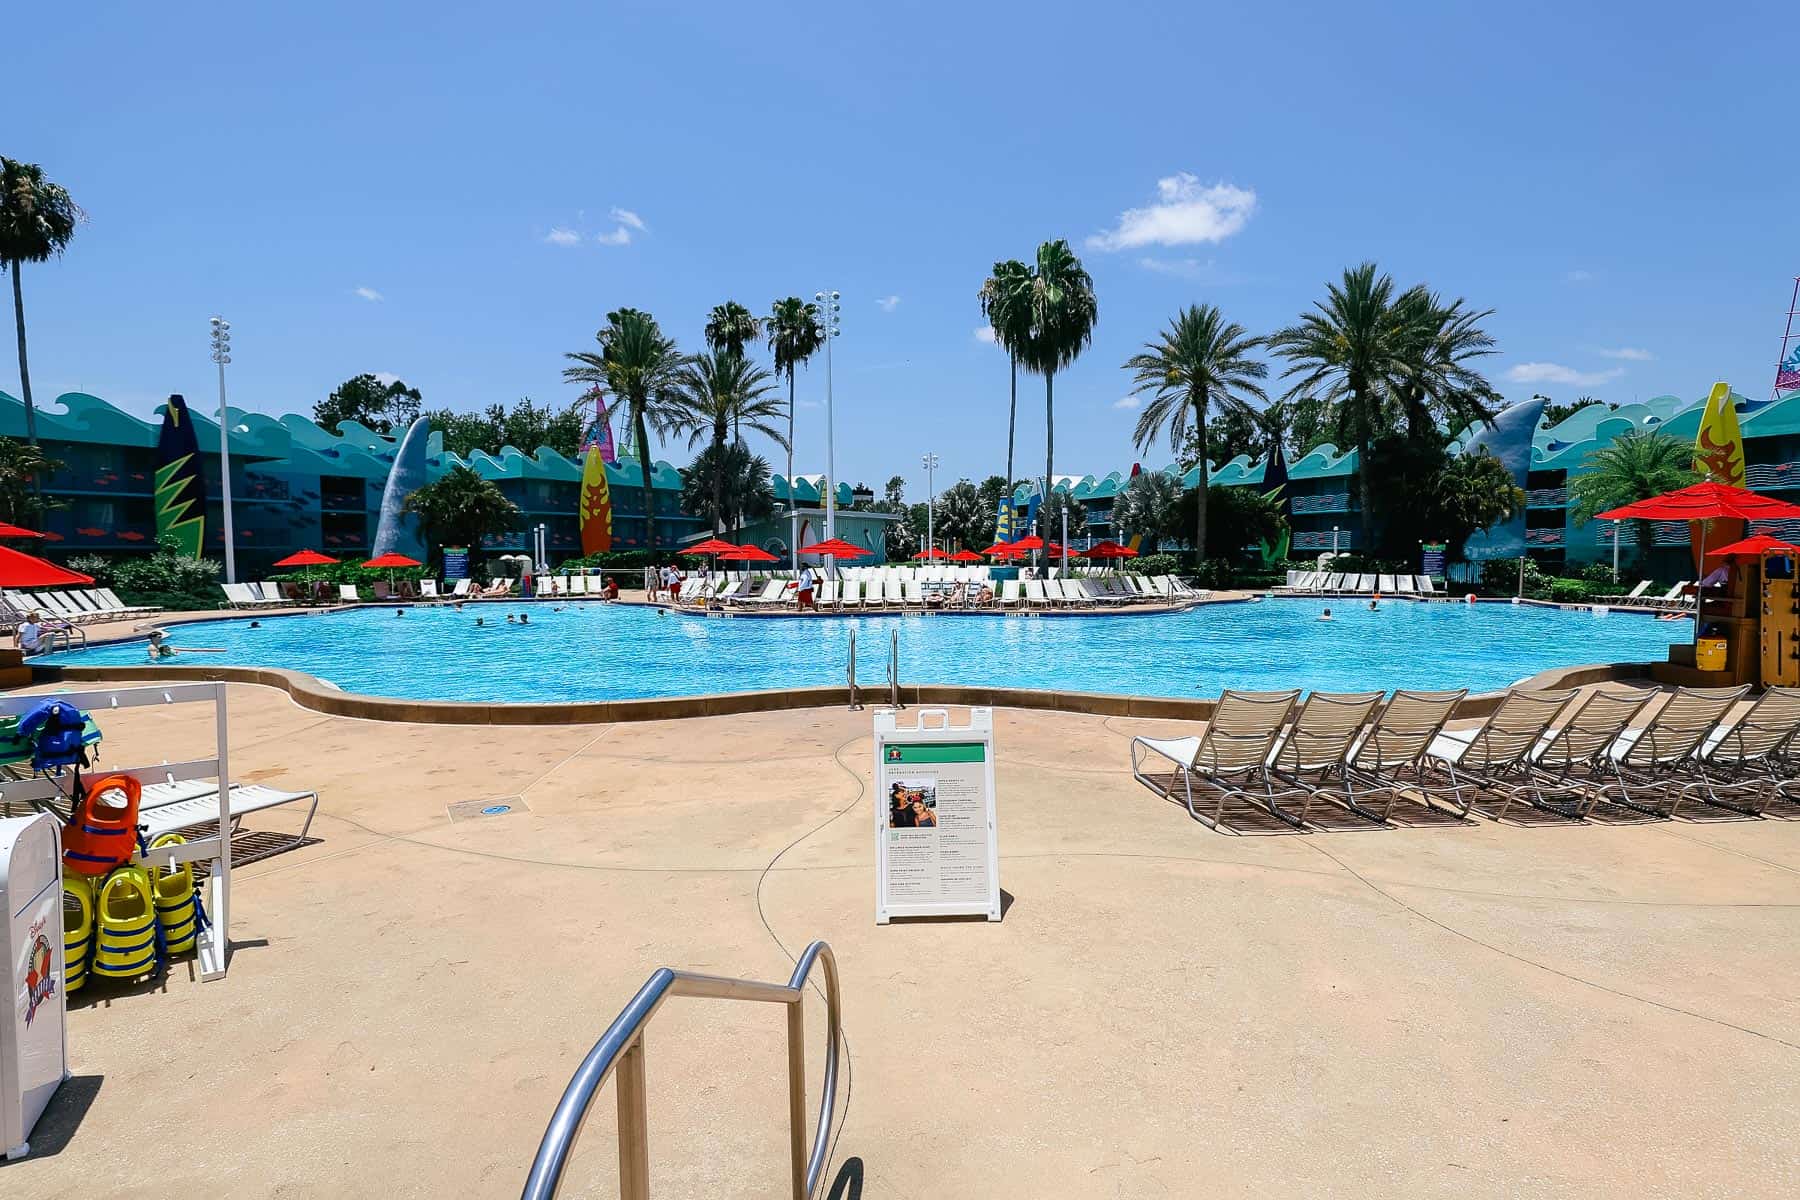 Shows the recreation calendar in front of the feature pool 